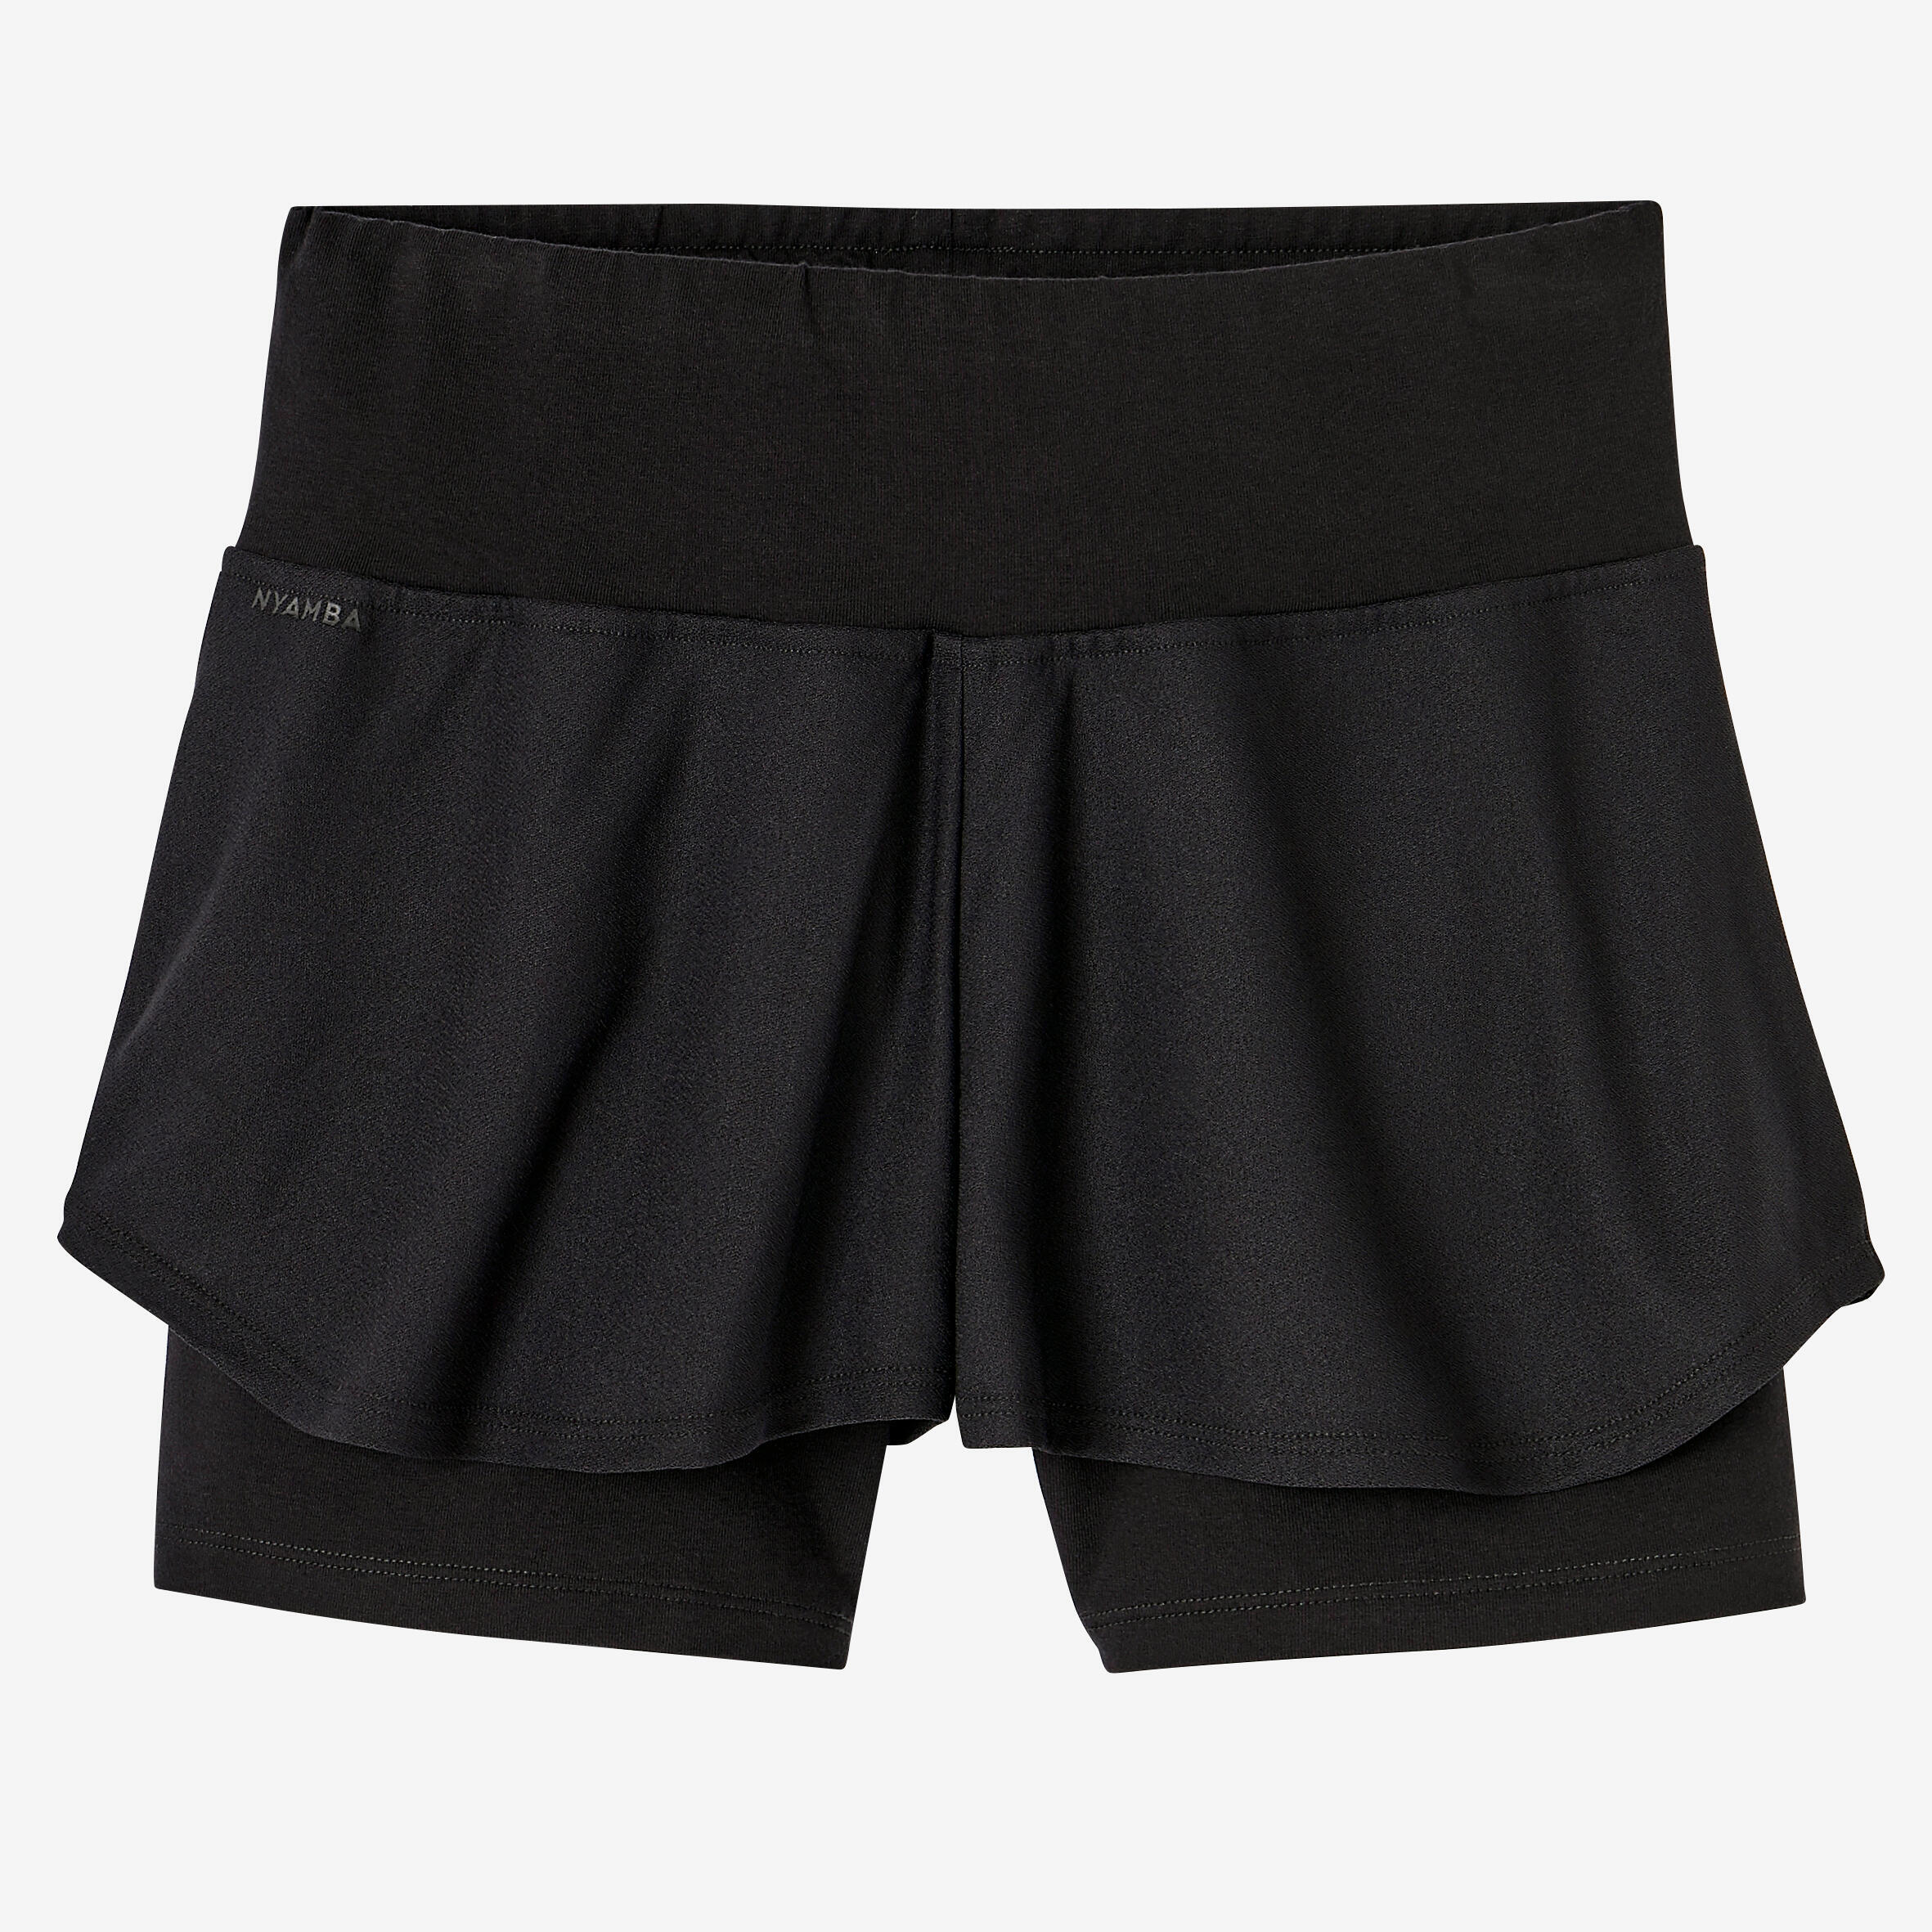 Women's Fitness 2-in-1 Cotton Shorts and Undershorts - Black 6/6